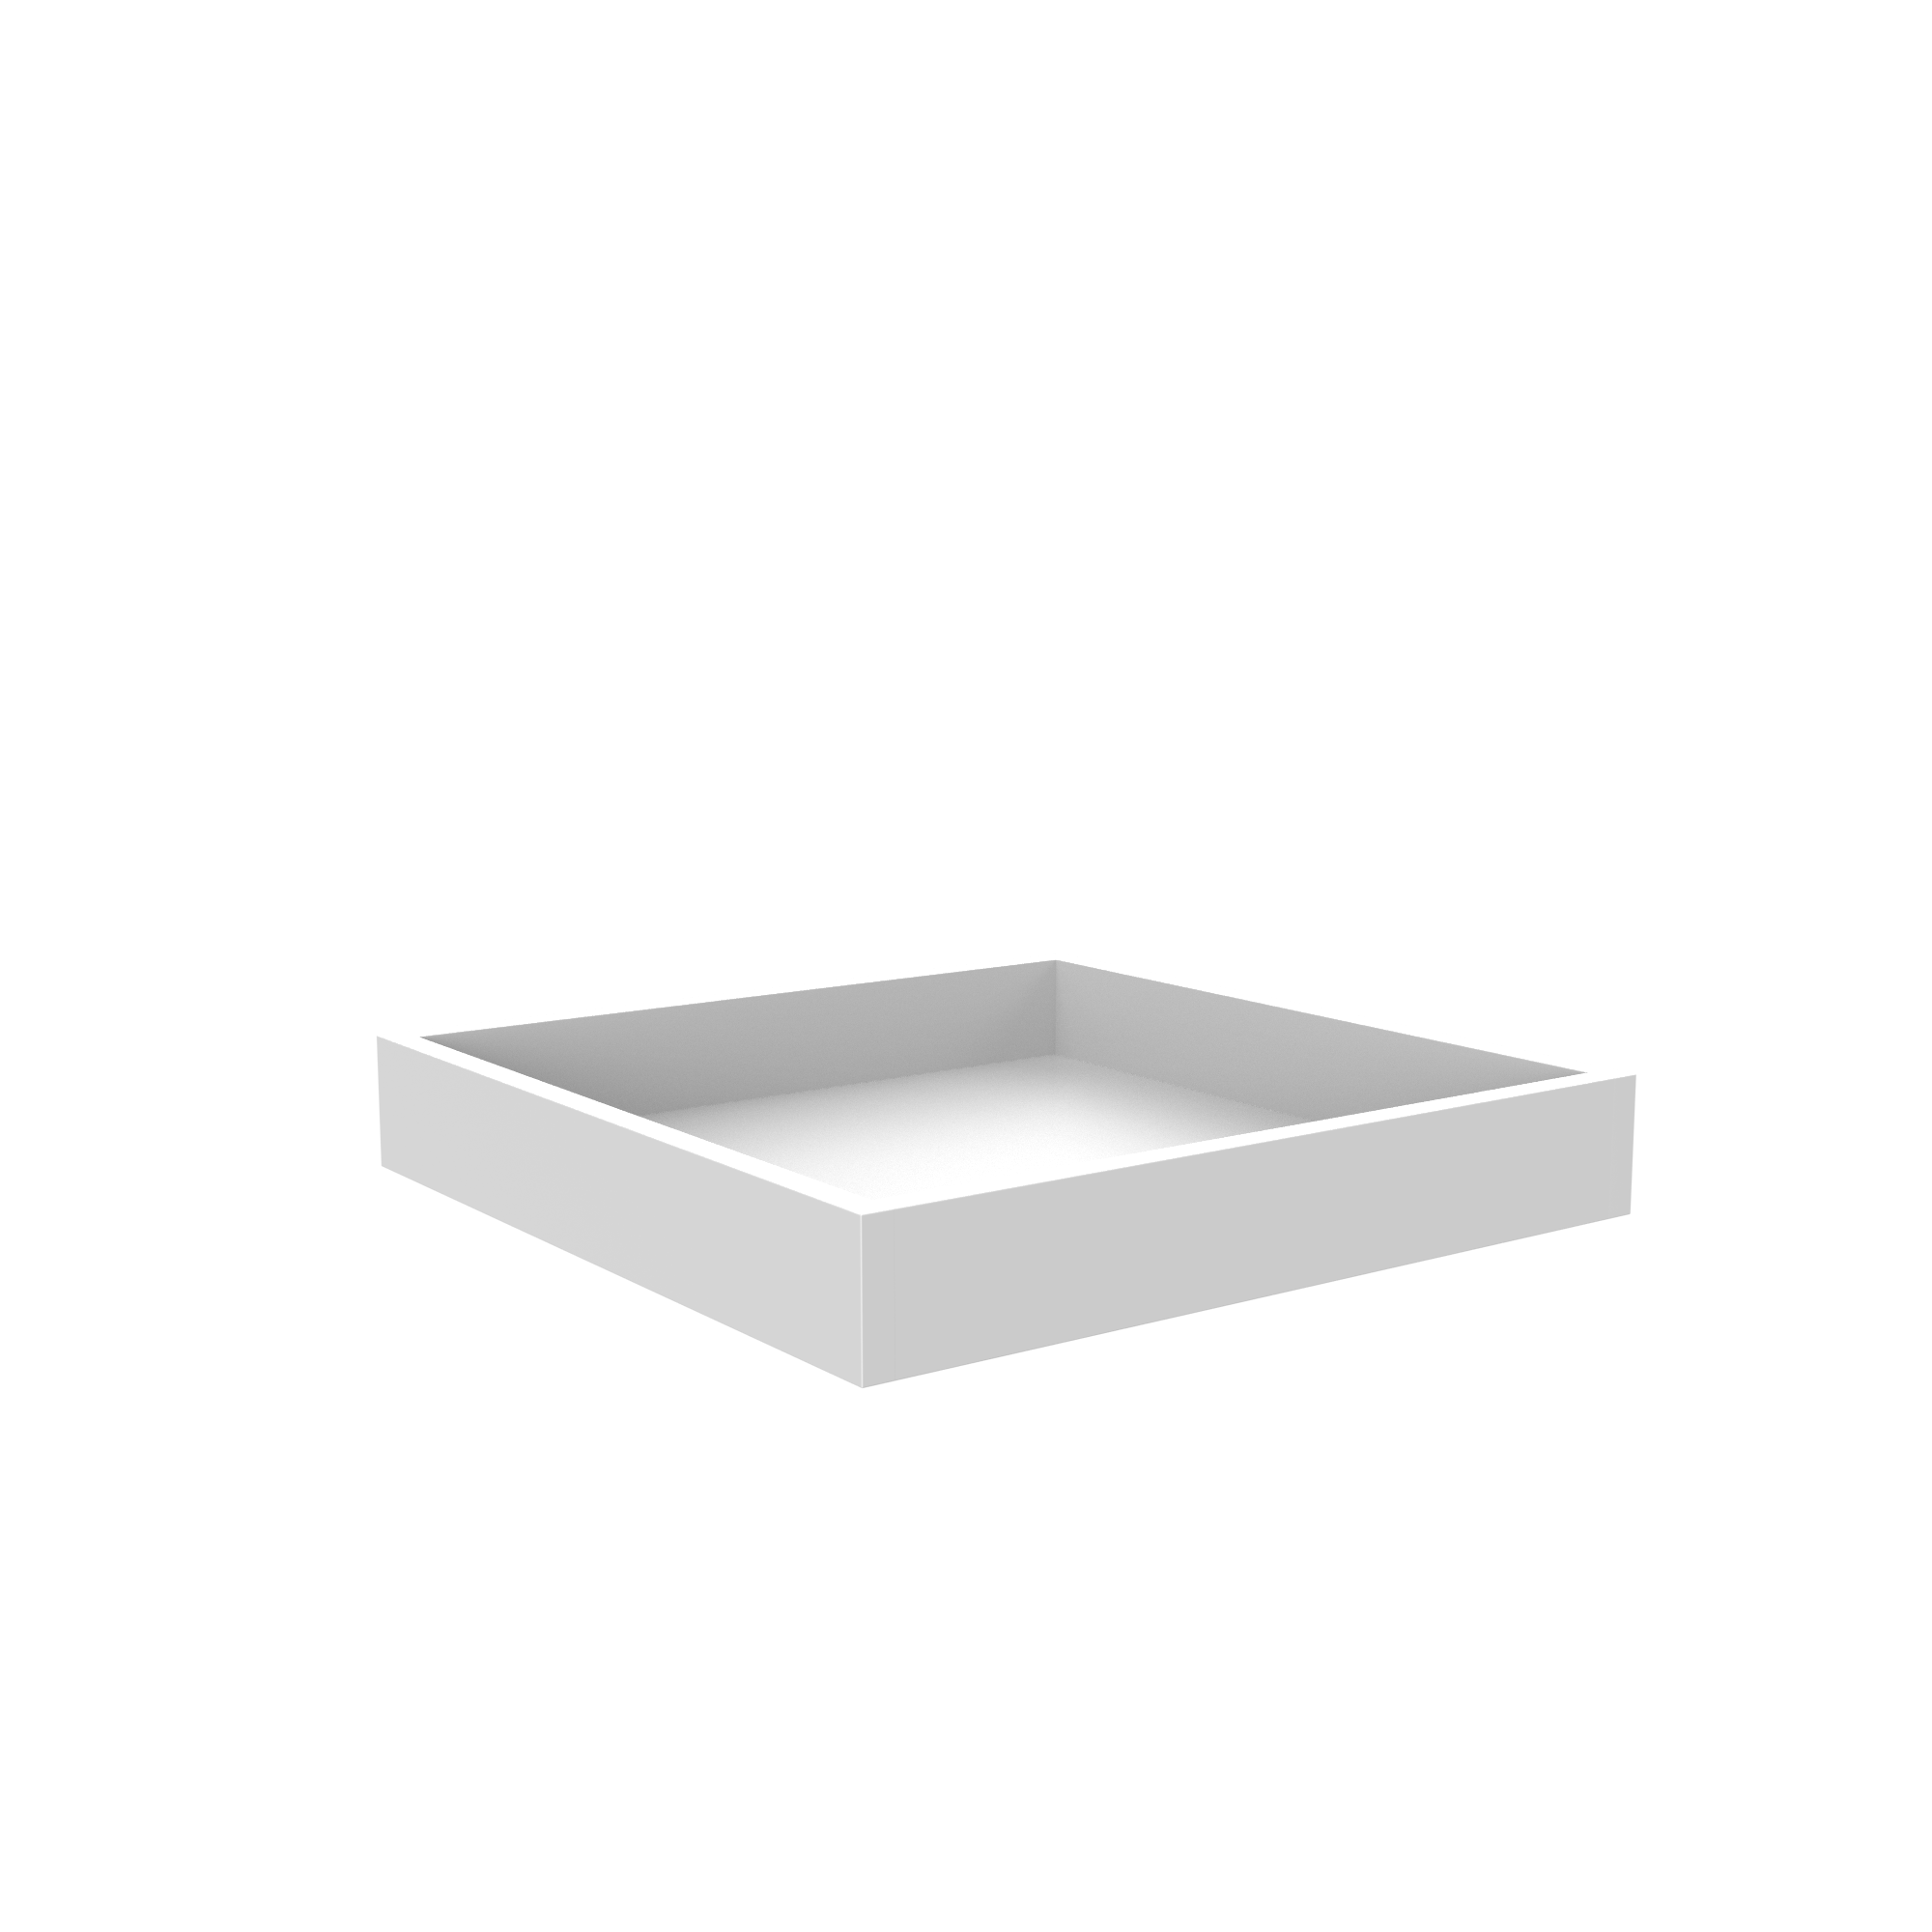 Roll Out Tray for Cabinets - Fits B21 - Aria White Shaker Cabinet - RTA